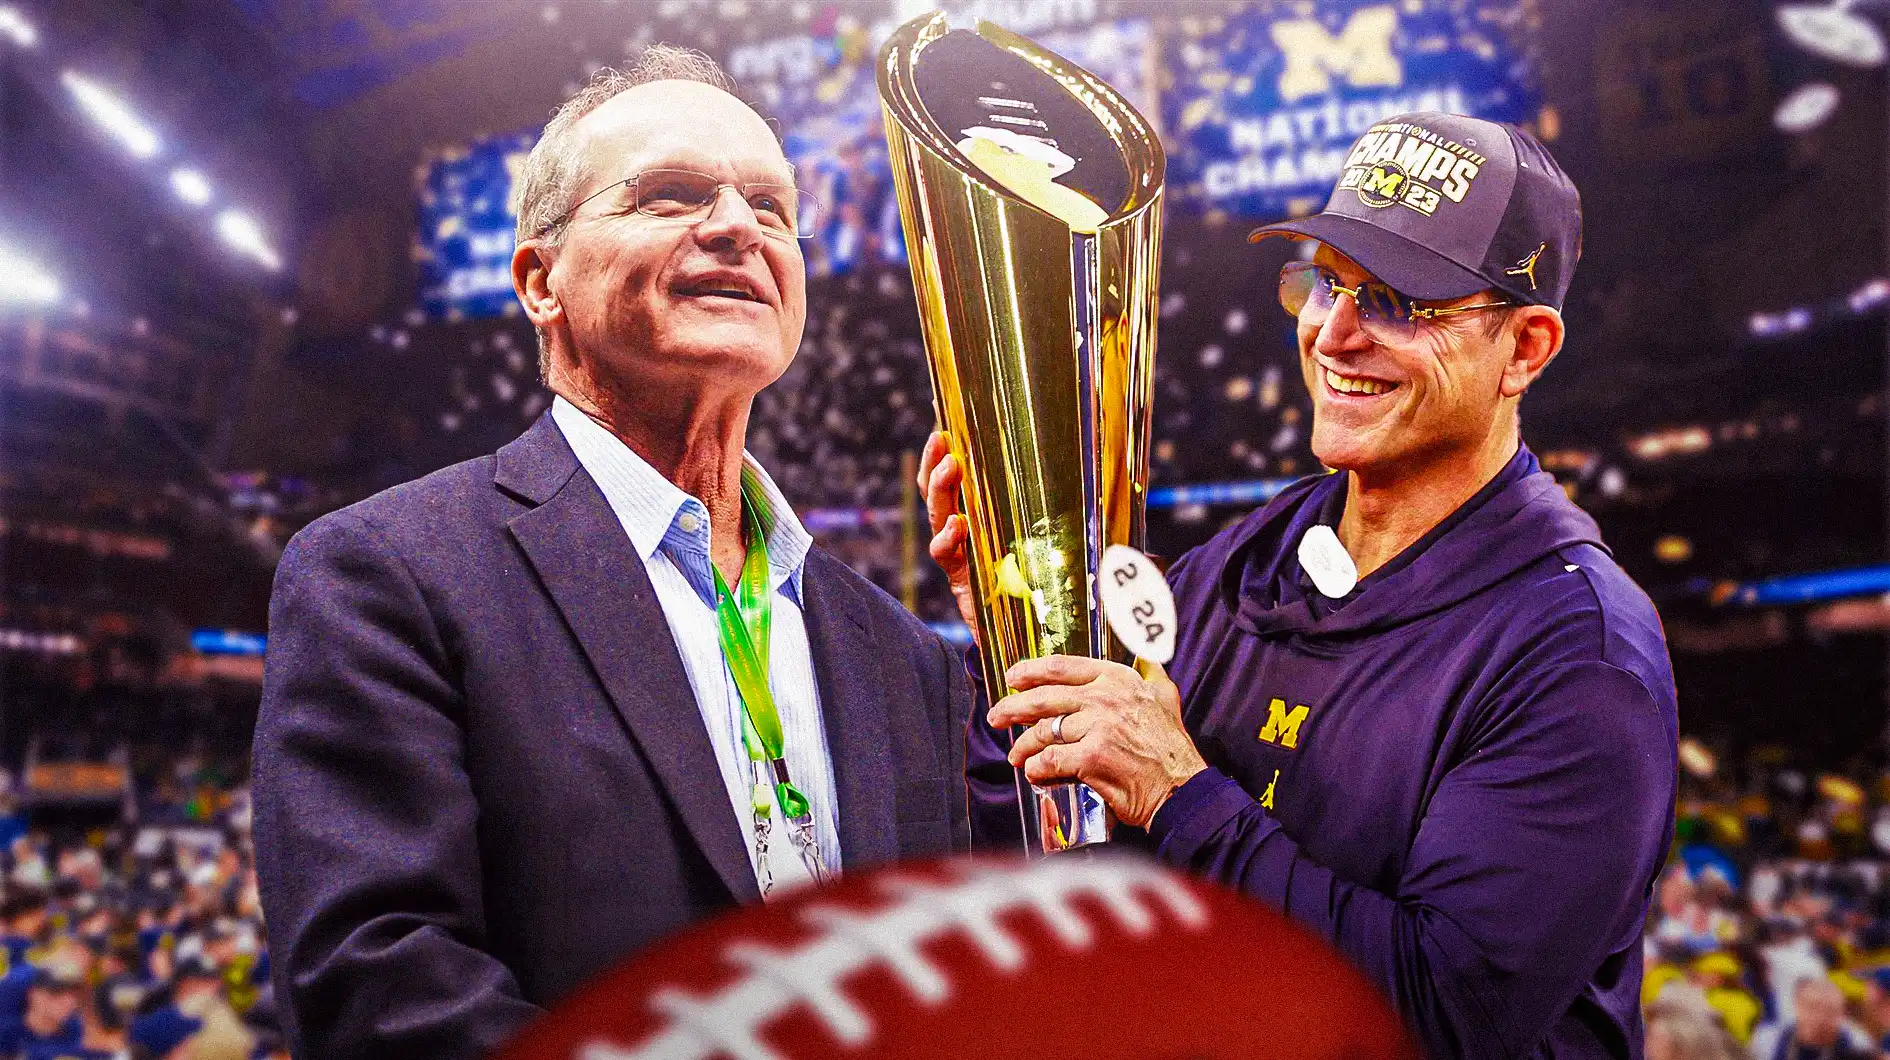 Michigan football coach Jim Harbaugh on the right, with dad Jack Harbaugh on the left.